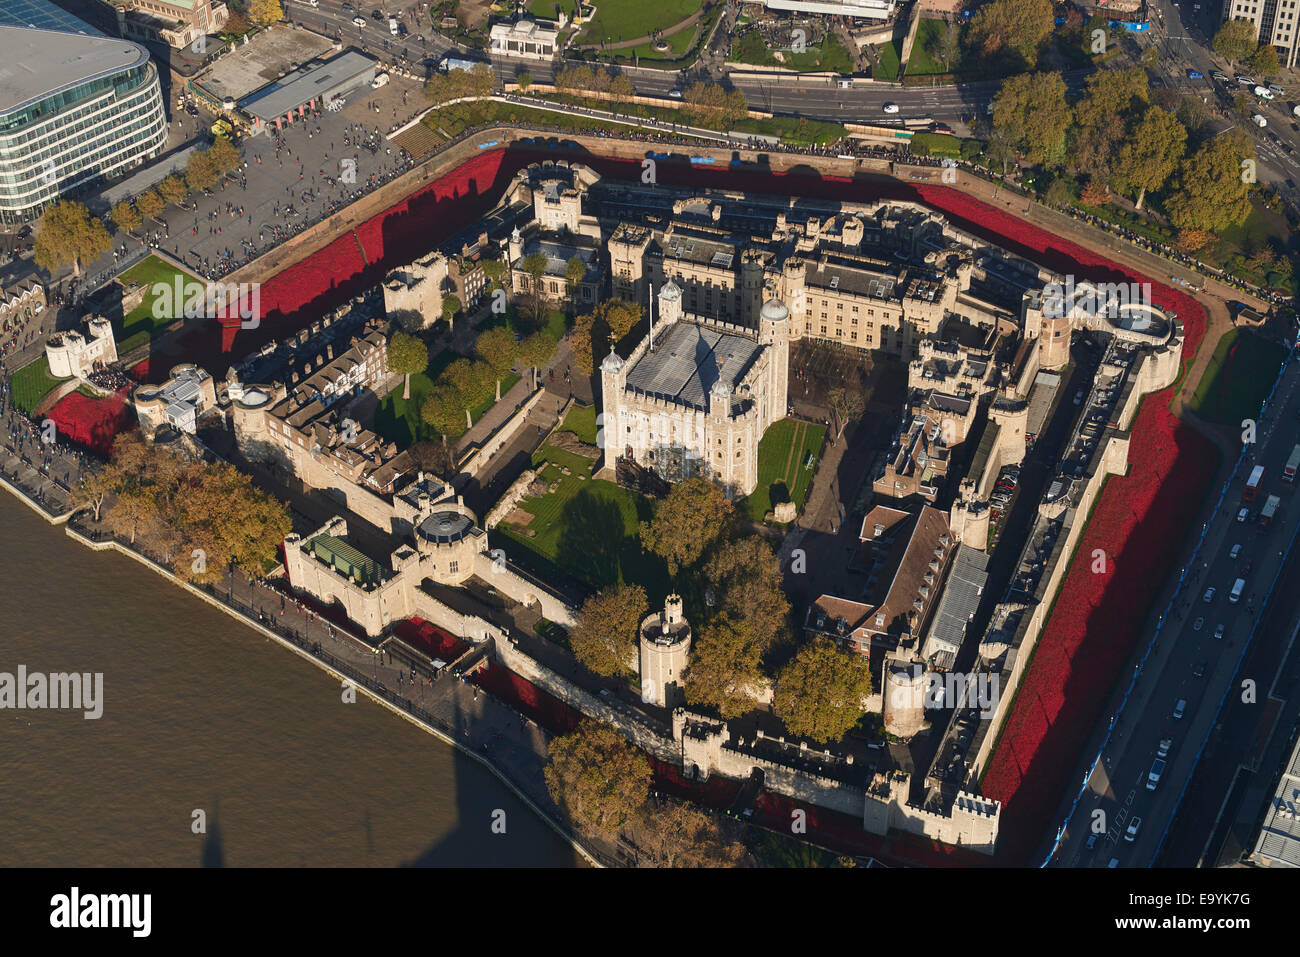 Aerial photograph of Tower of London Poppies Stock Photo